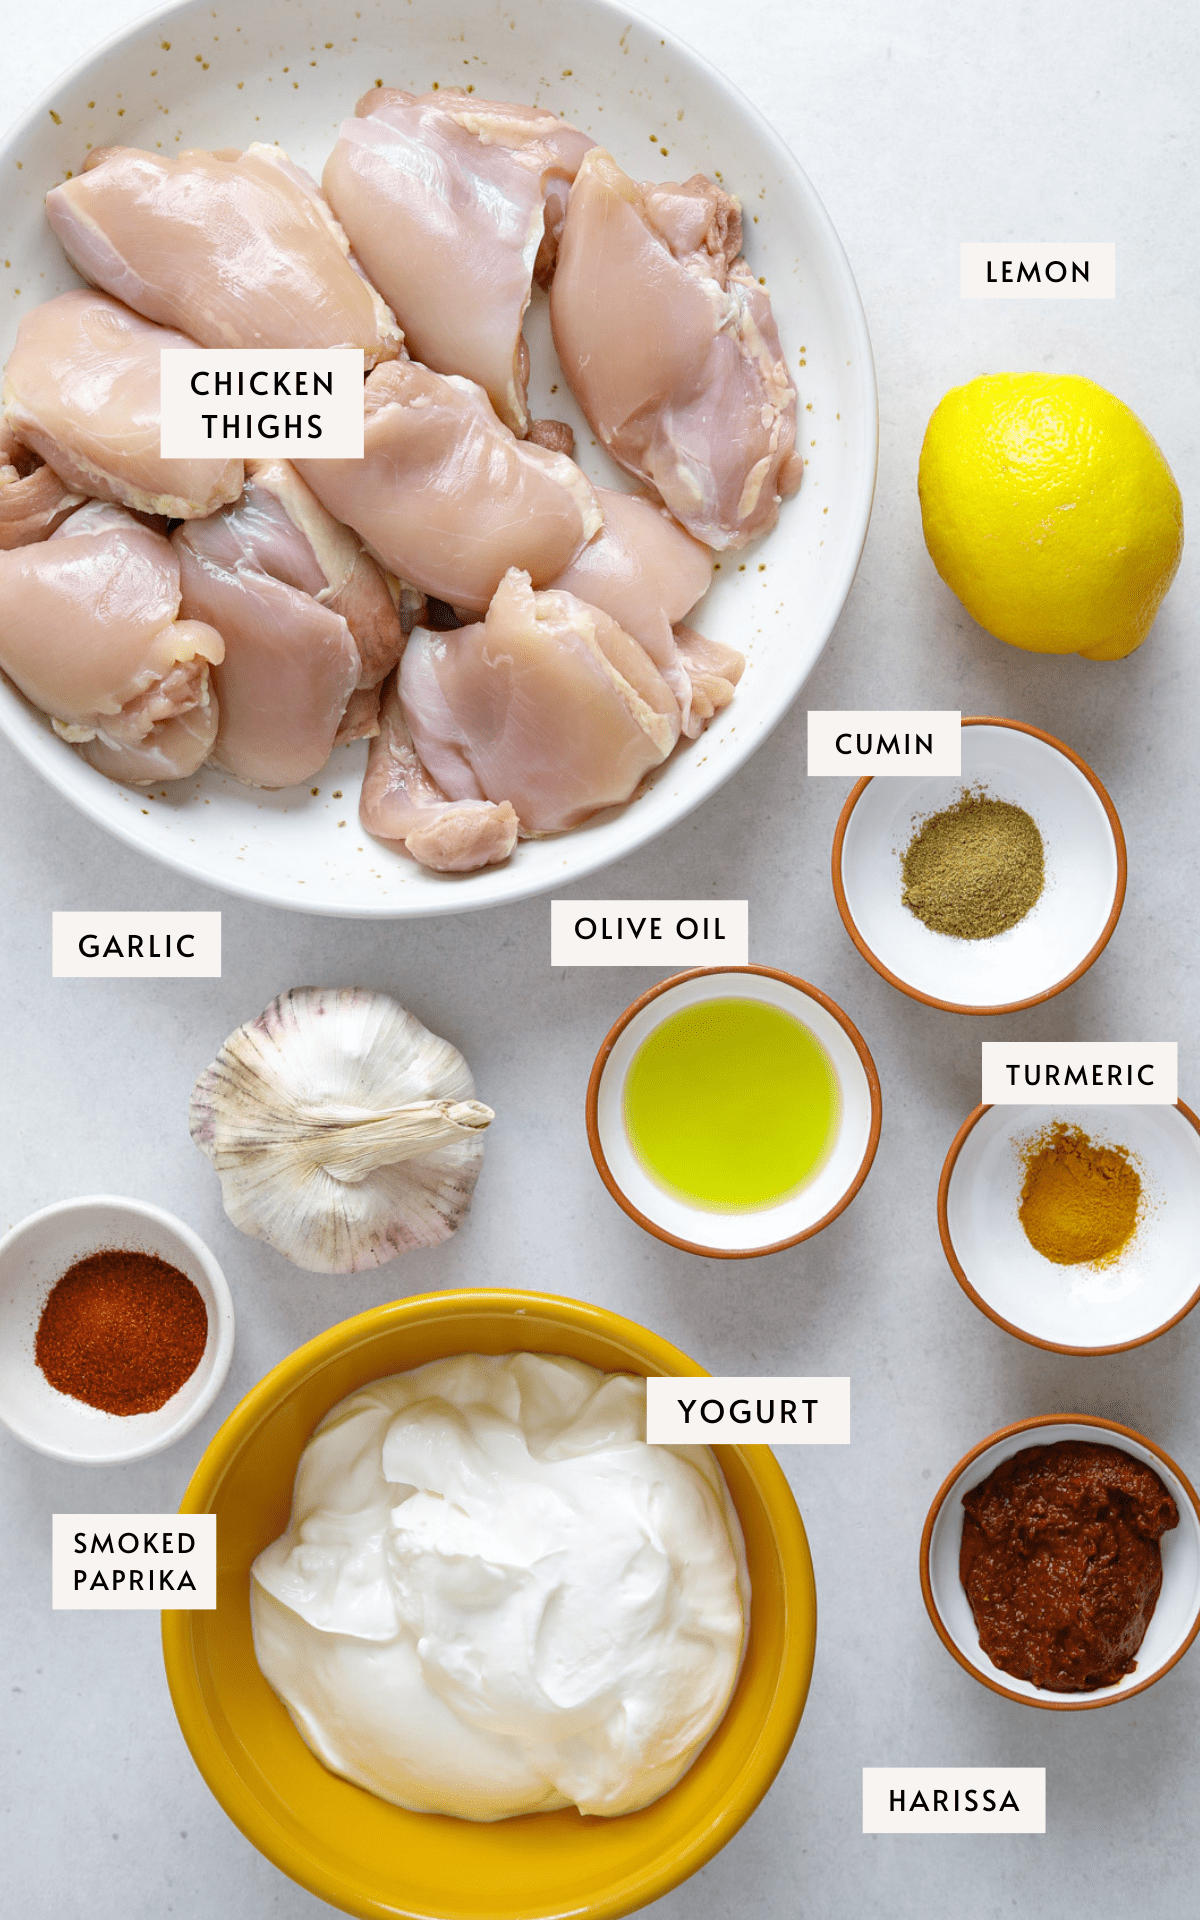 A bowl of raw chicken thighs, lemon, a bulb of garlic, a bowl of greek yogurt and spices in small bowls.